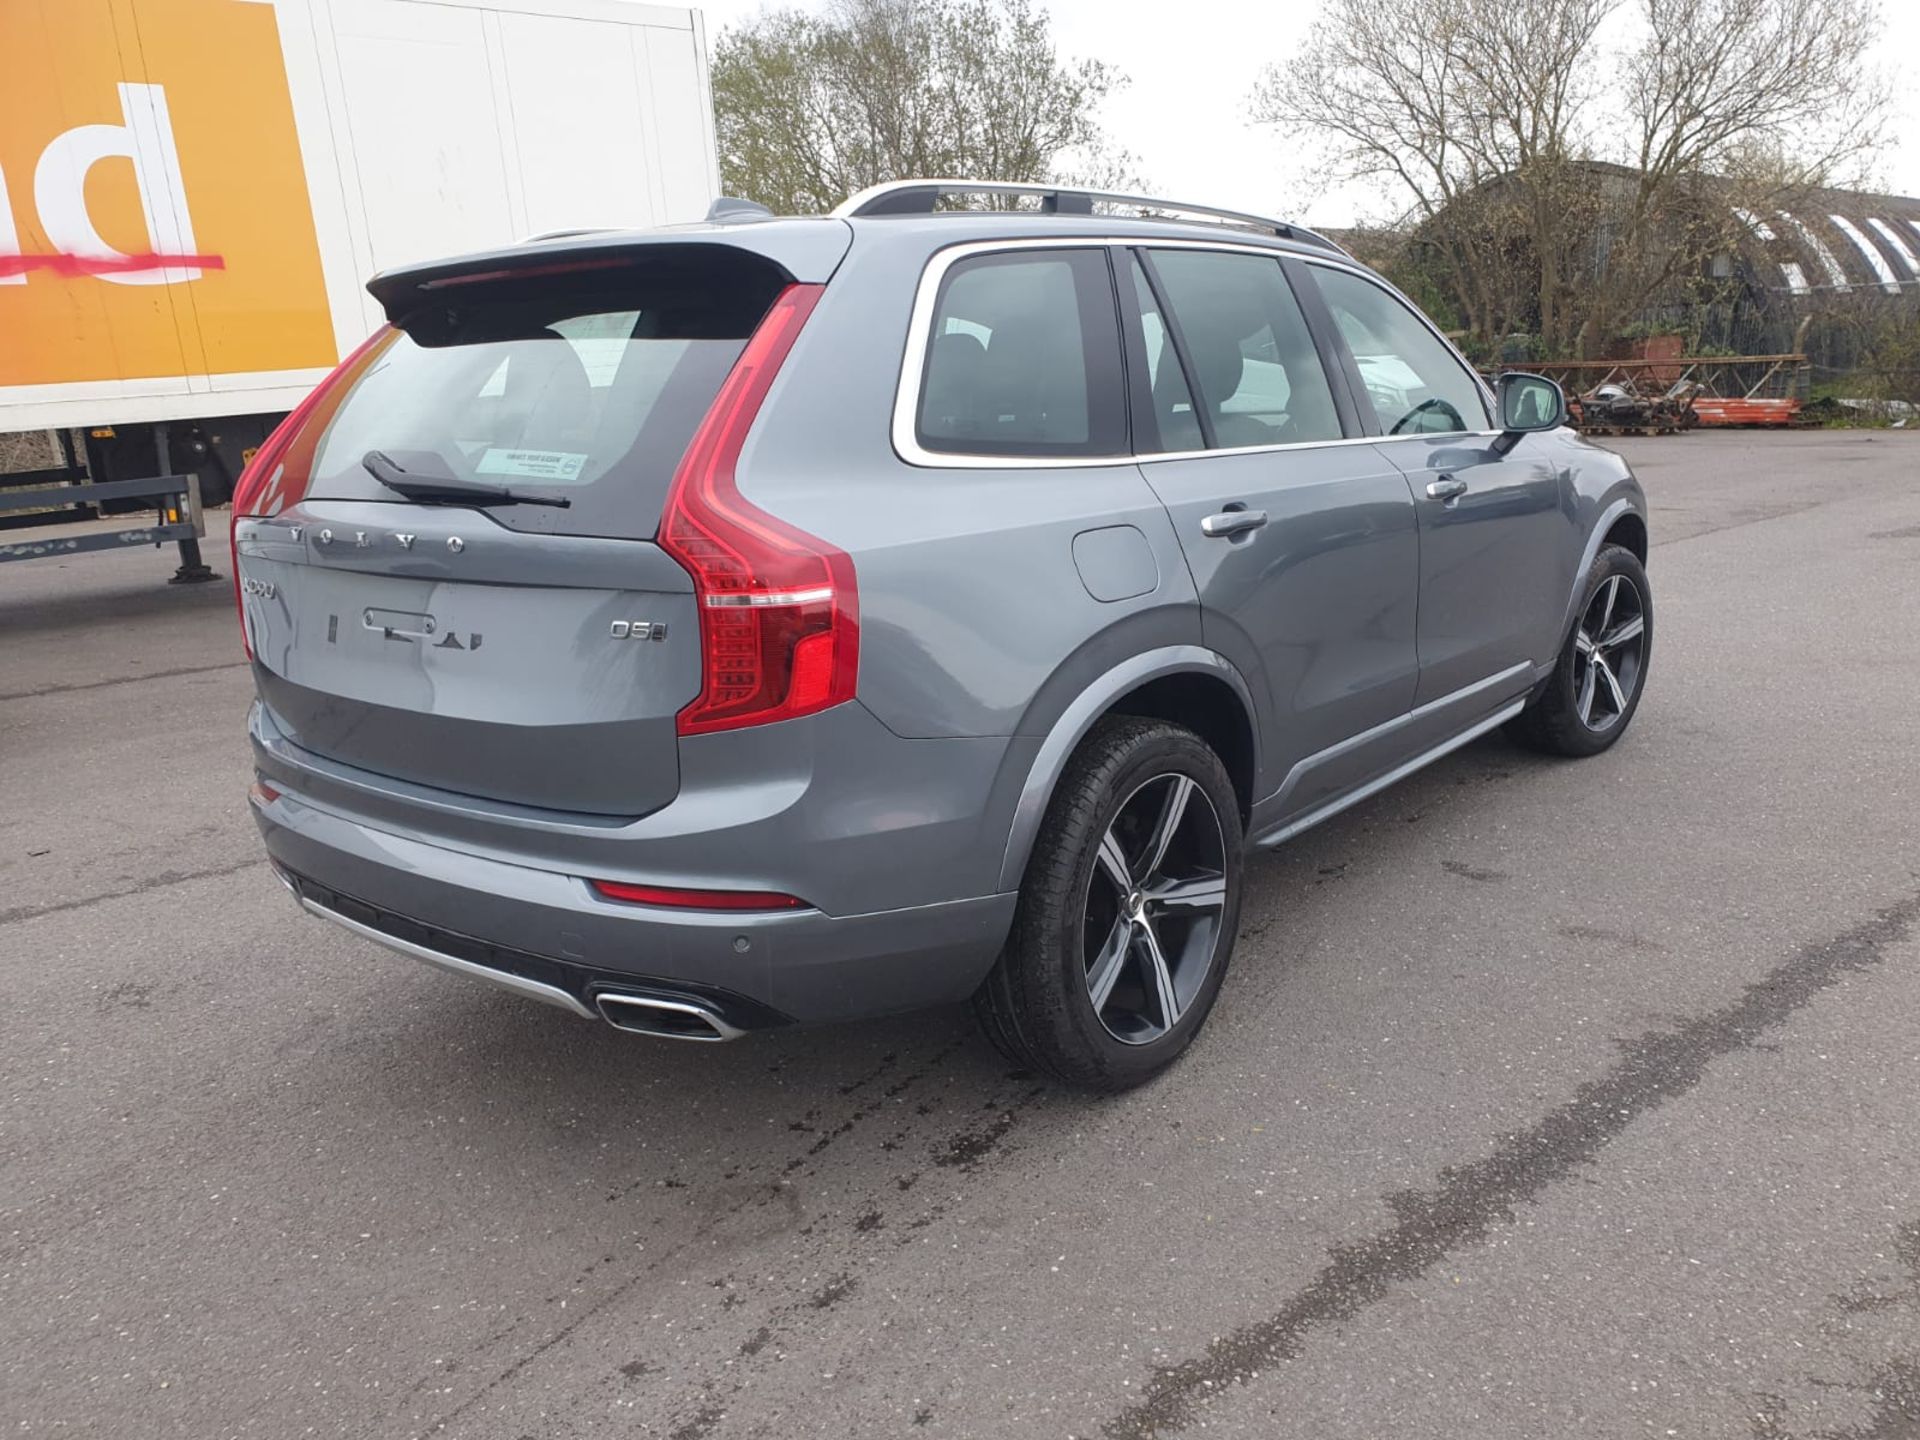 LOW MILEAGE, 2018/18 REG VOLVO XC90 MOMENTUM D5 P-PULSE 2.0 DIESEL 7 SEAT, SHOWING 0 FORMER KEEPERS - Image 6 of 18